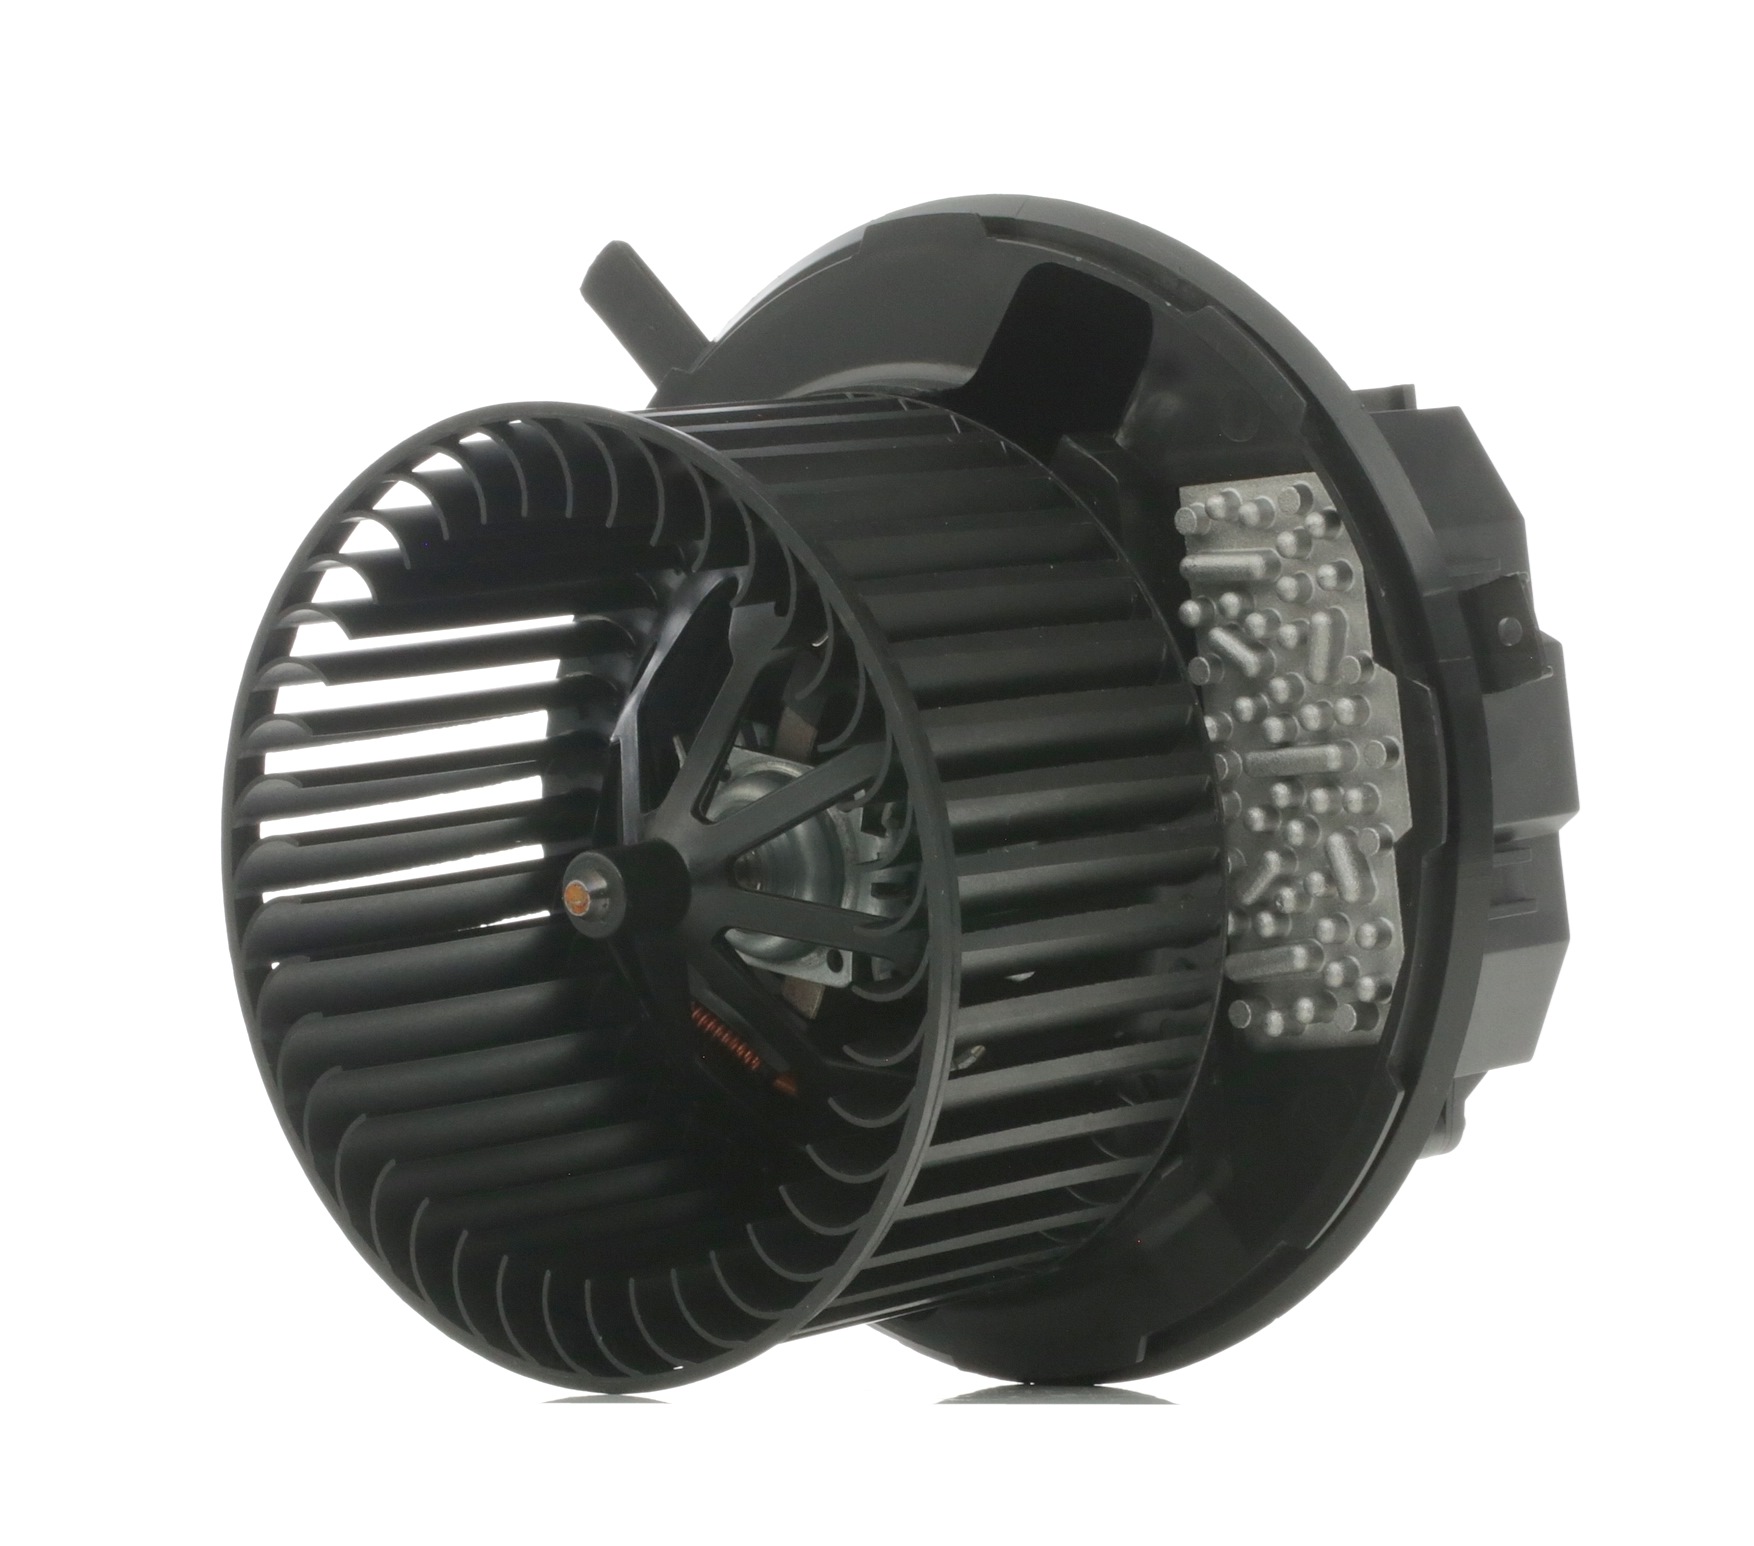 SKIB-0310153 STARK Heater blower motor SEAT for right-hand drive vehicles, with resistor